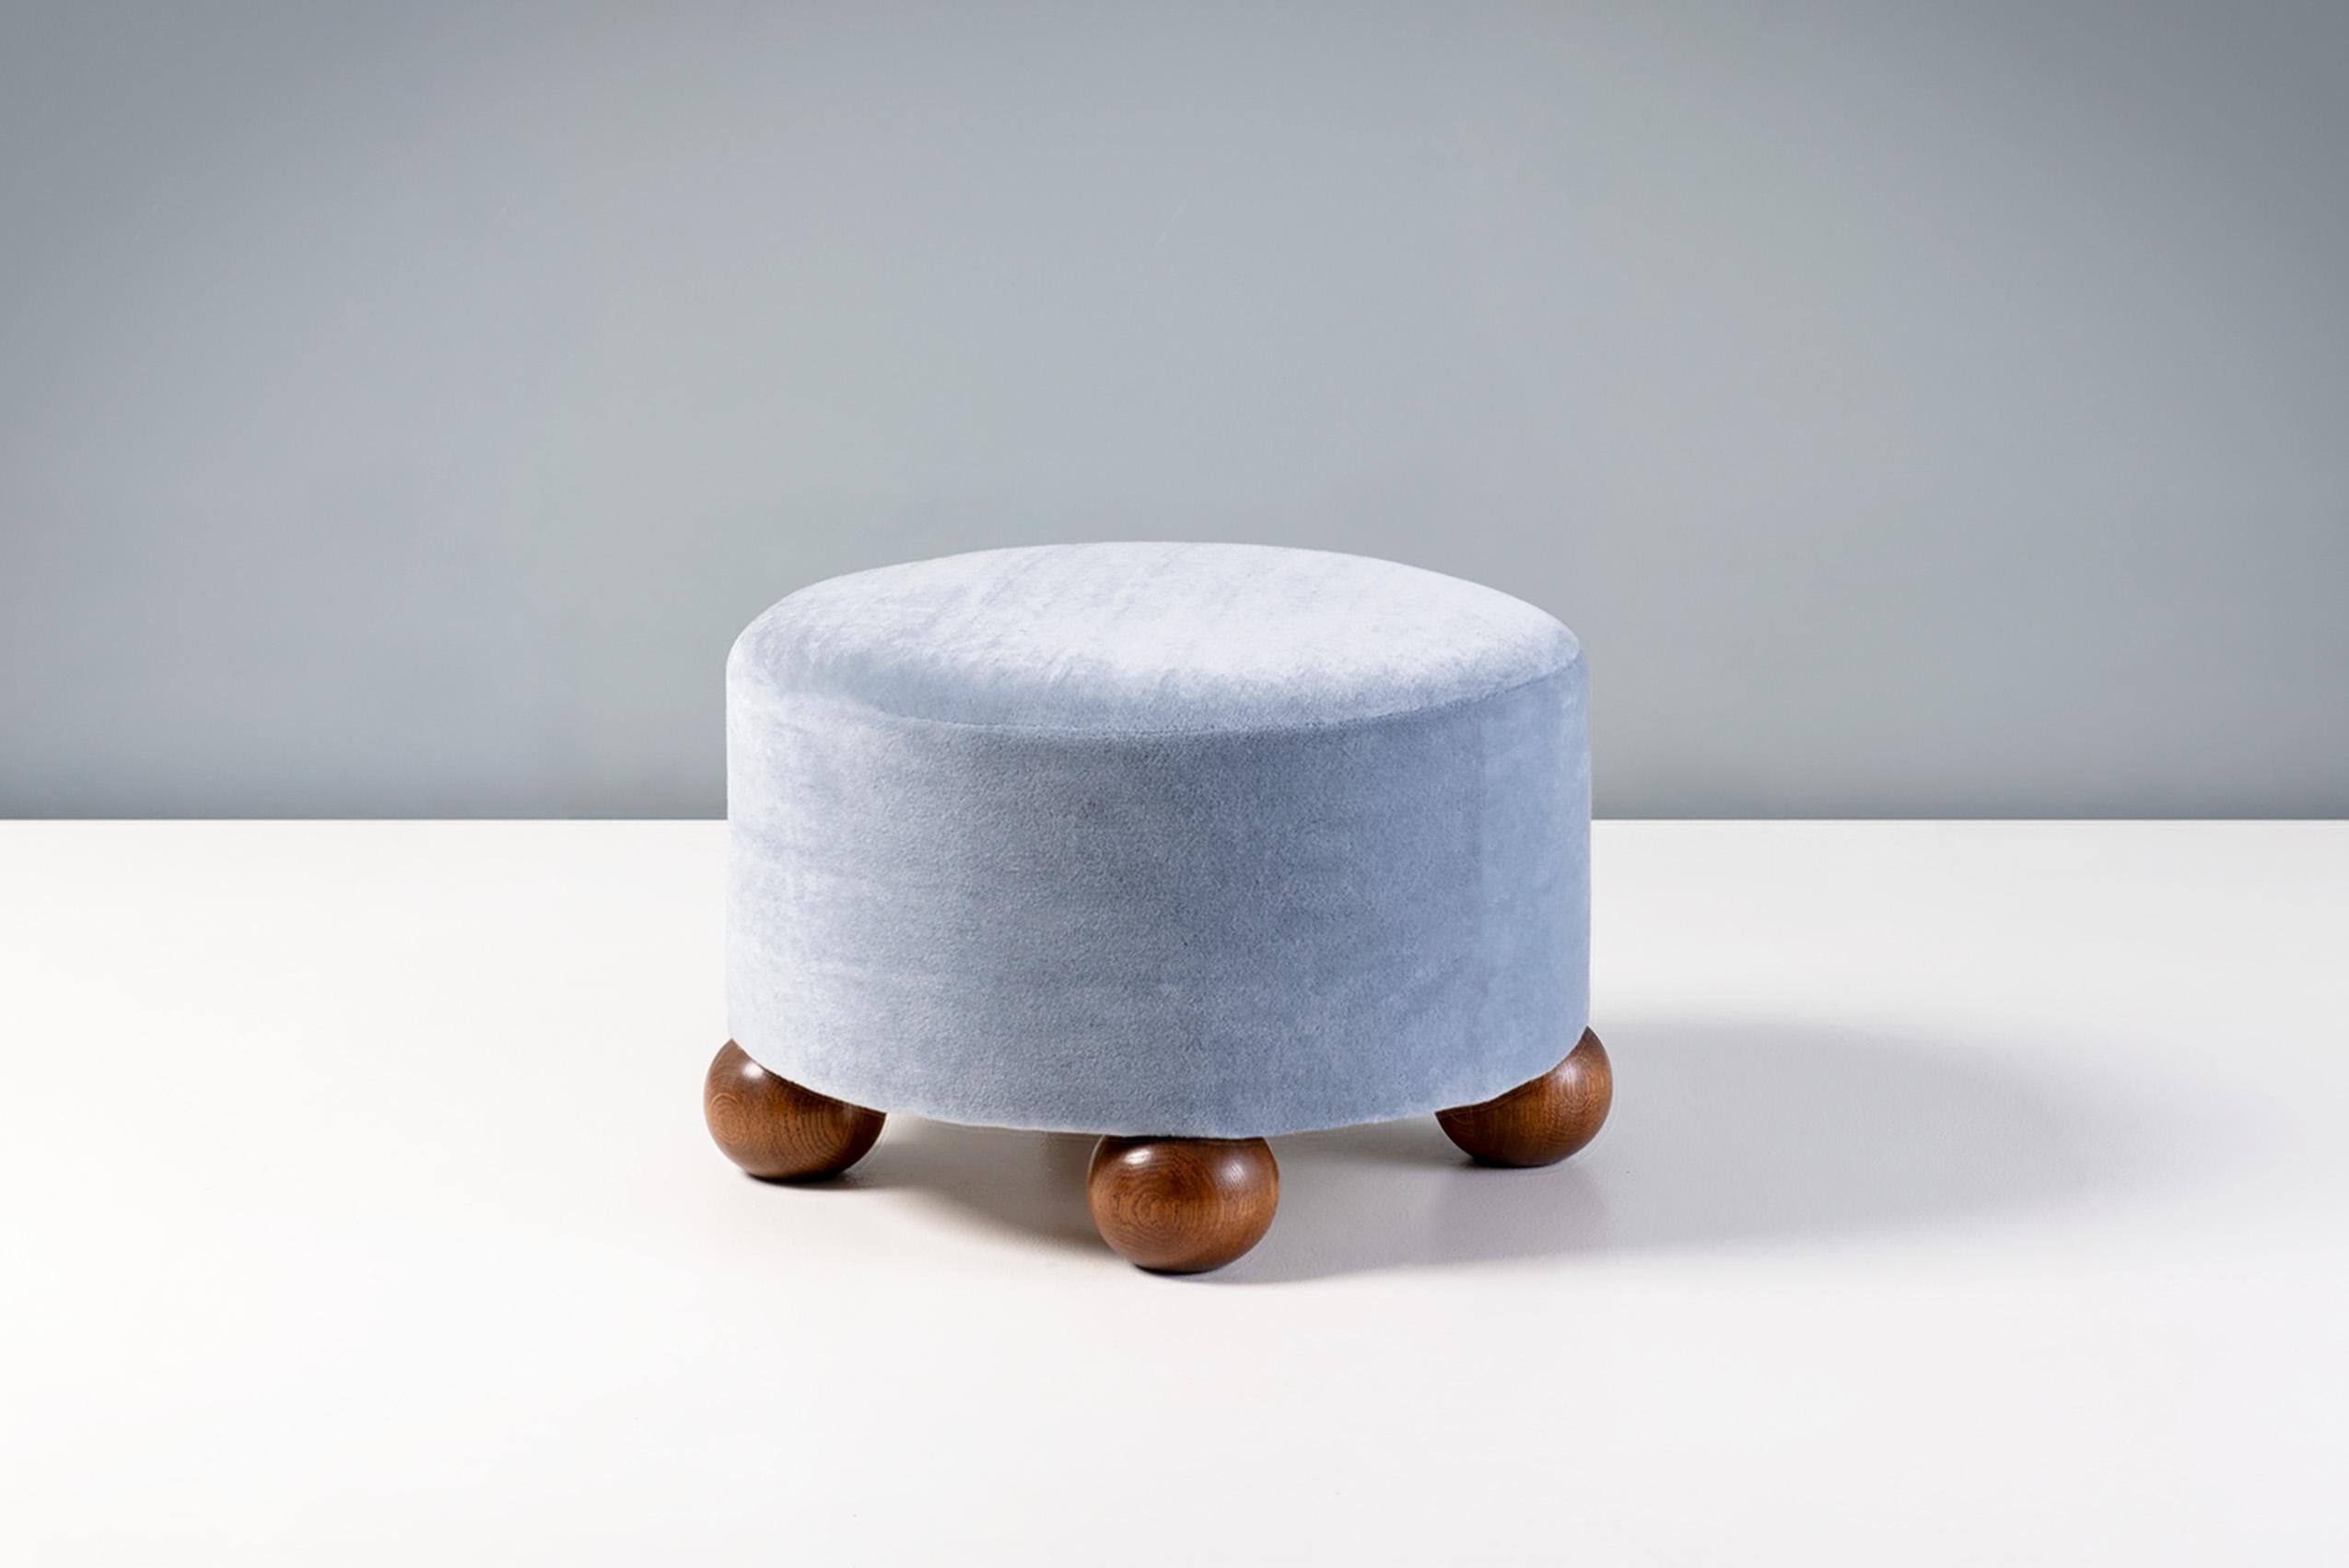 Dagmar - Luupo Round Ottoman

Custom-made ottoman developed & produced at our workshops in London using the highest quality materials. This example is upholstered in a sky blue mohair velvet by Pierre Frey with fumed oak ball feet. This ottoman is